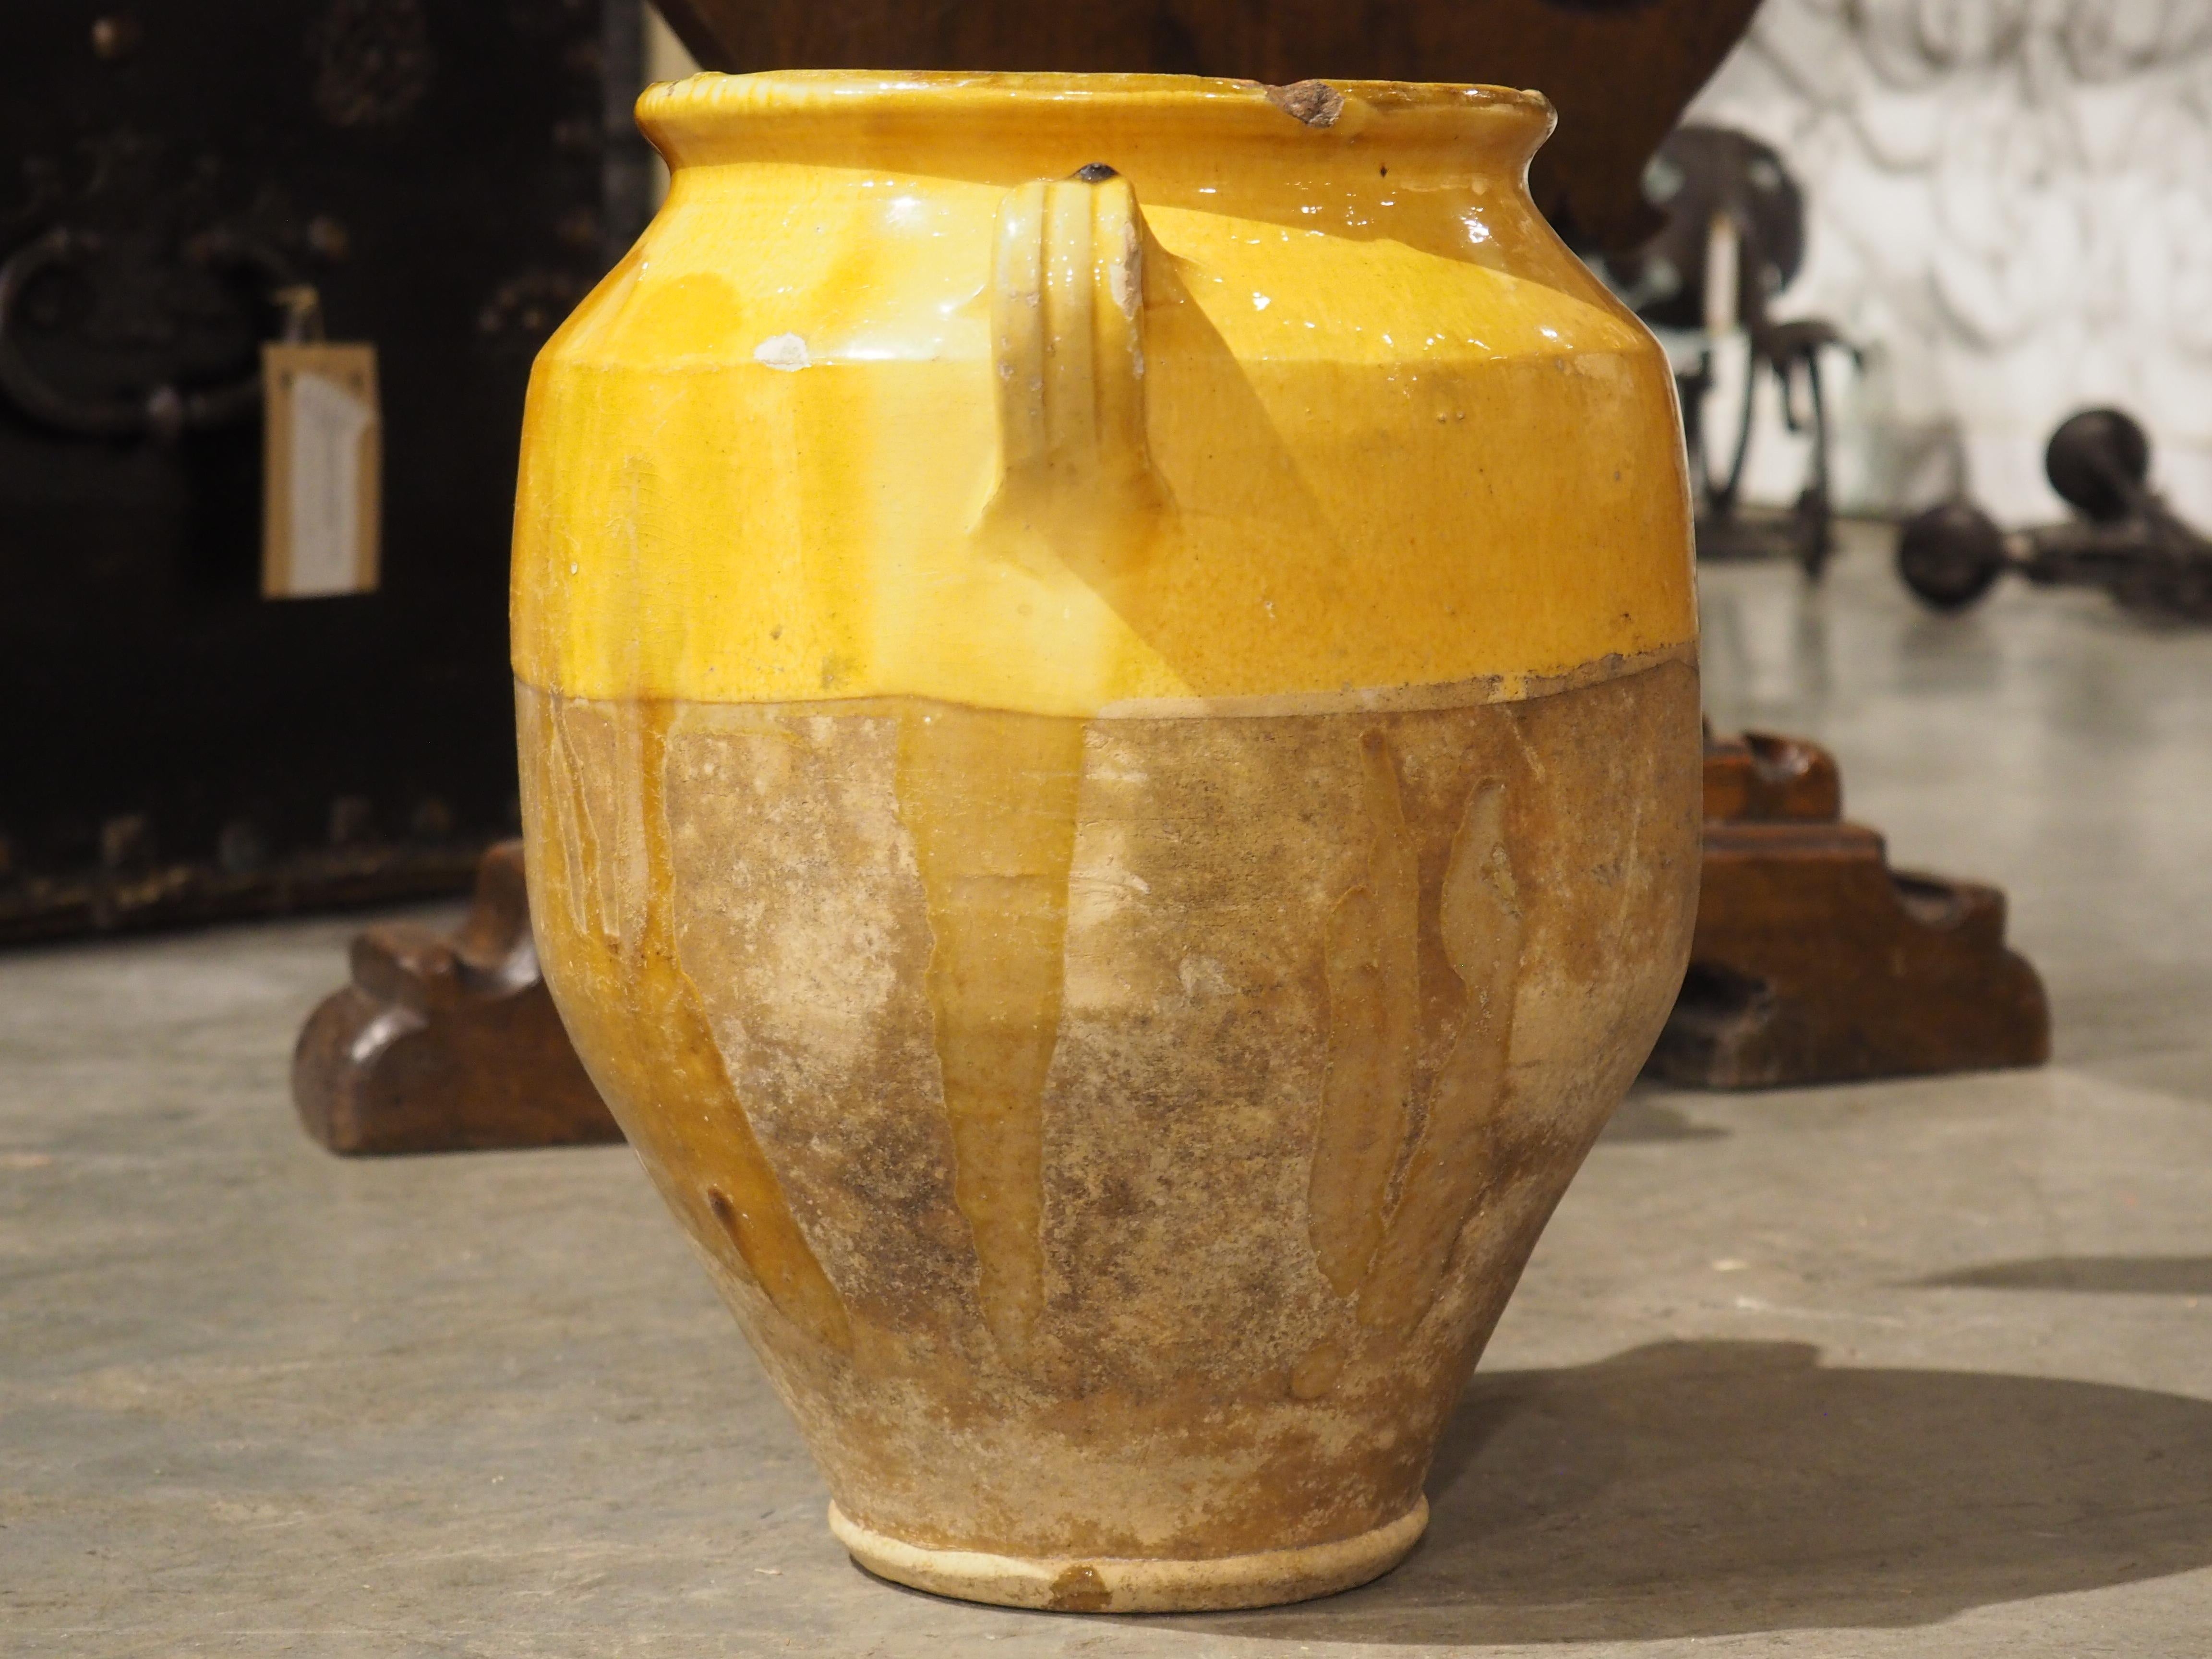 Part of our huge collection of large, colorful clay vessels, known as confit pots. Derived from the French word confire (meaning “to preserve”), confit pots were used to store cooked game in their own fat before the advent of refrigeration. The